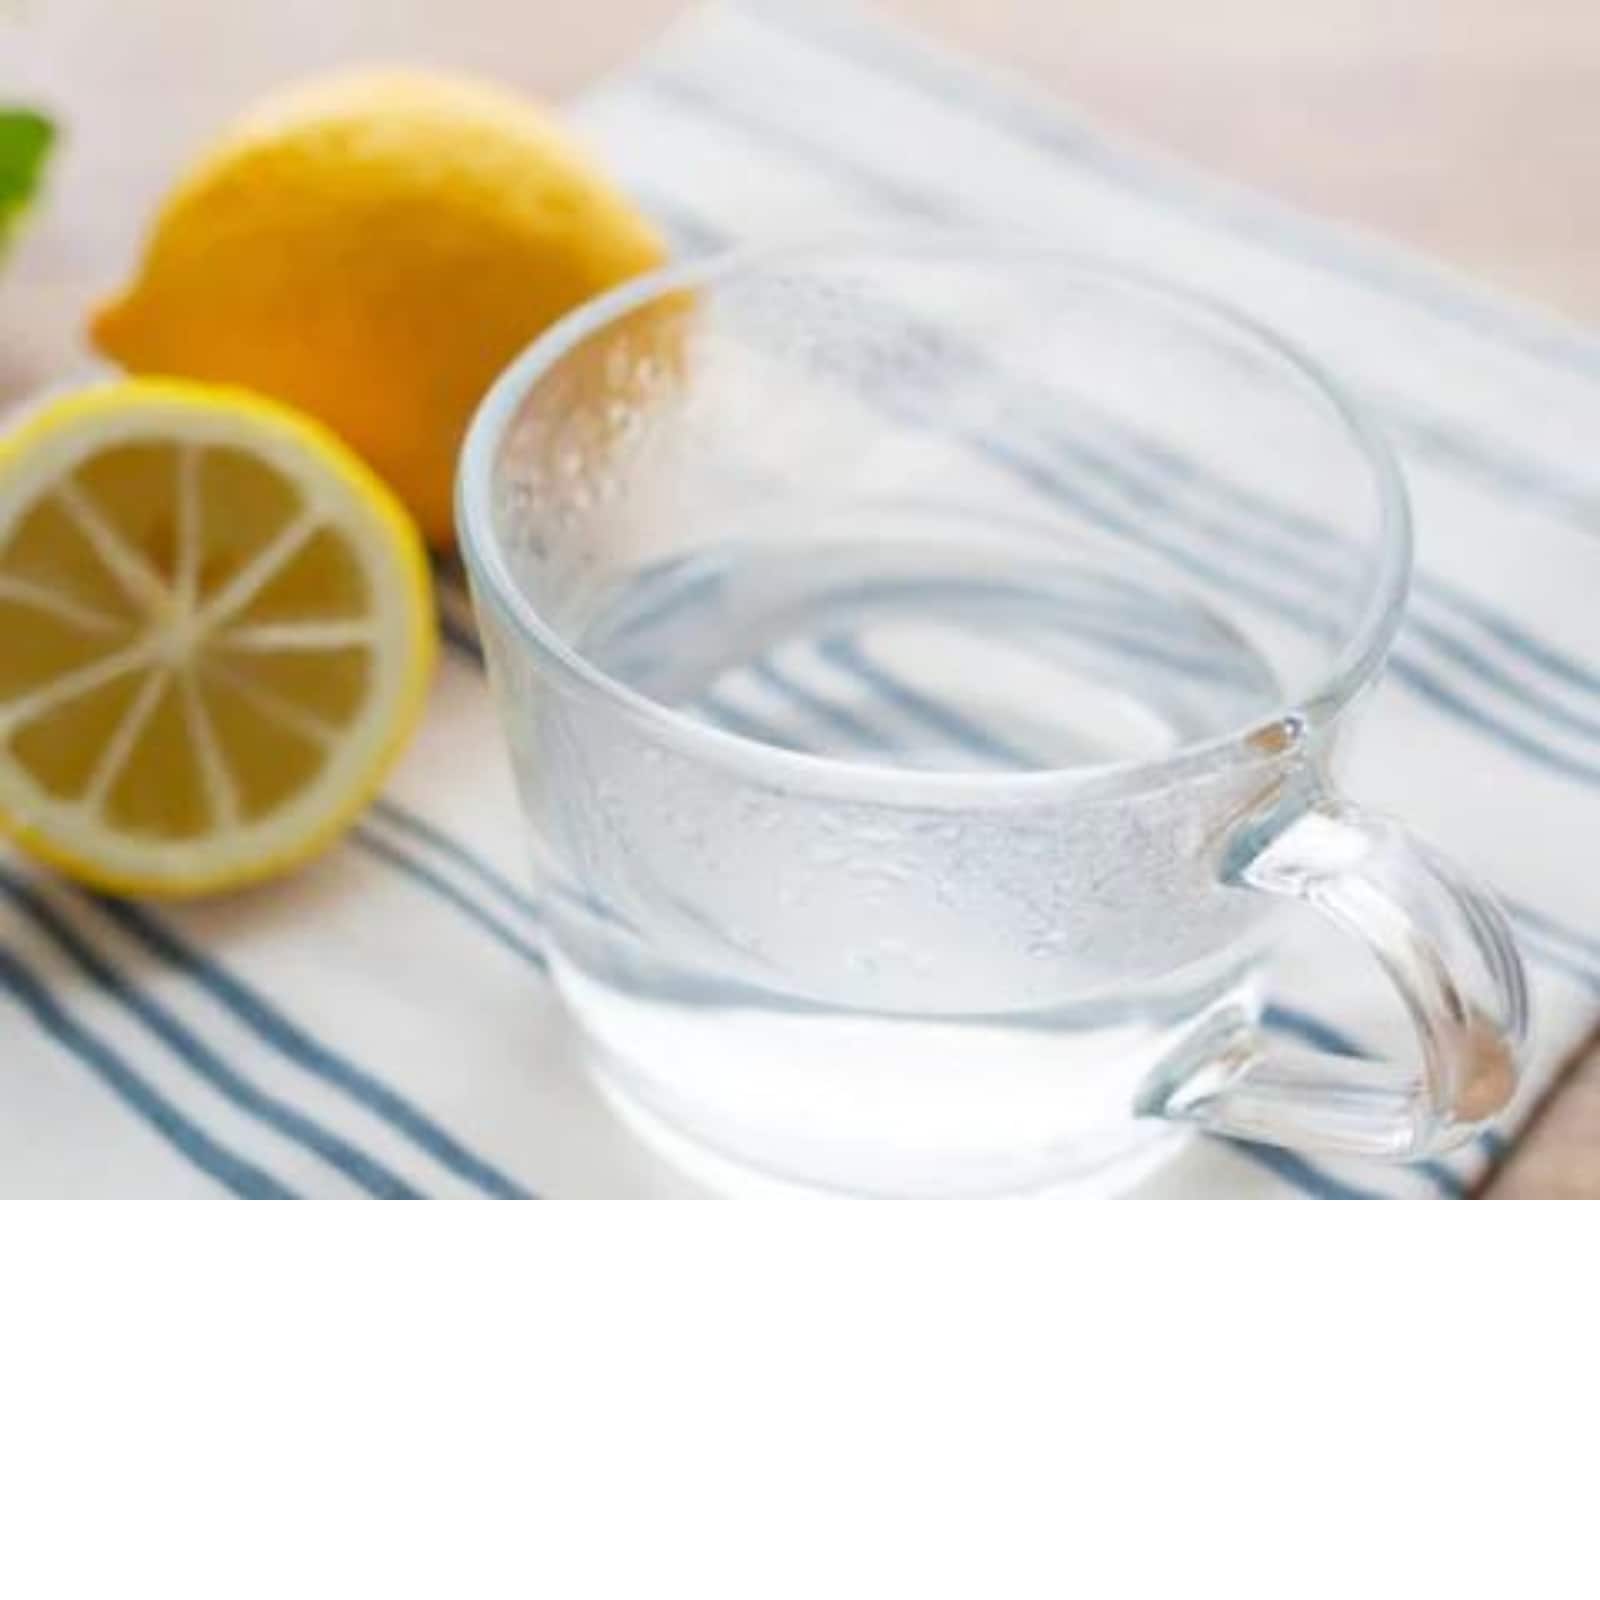 18 Benefits of Drinking Hot Water: How Can It Help Your Health?